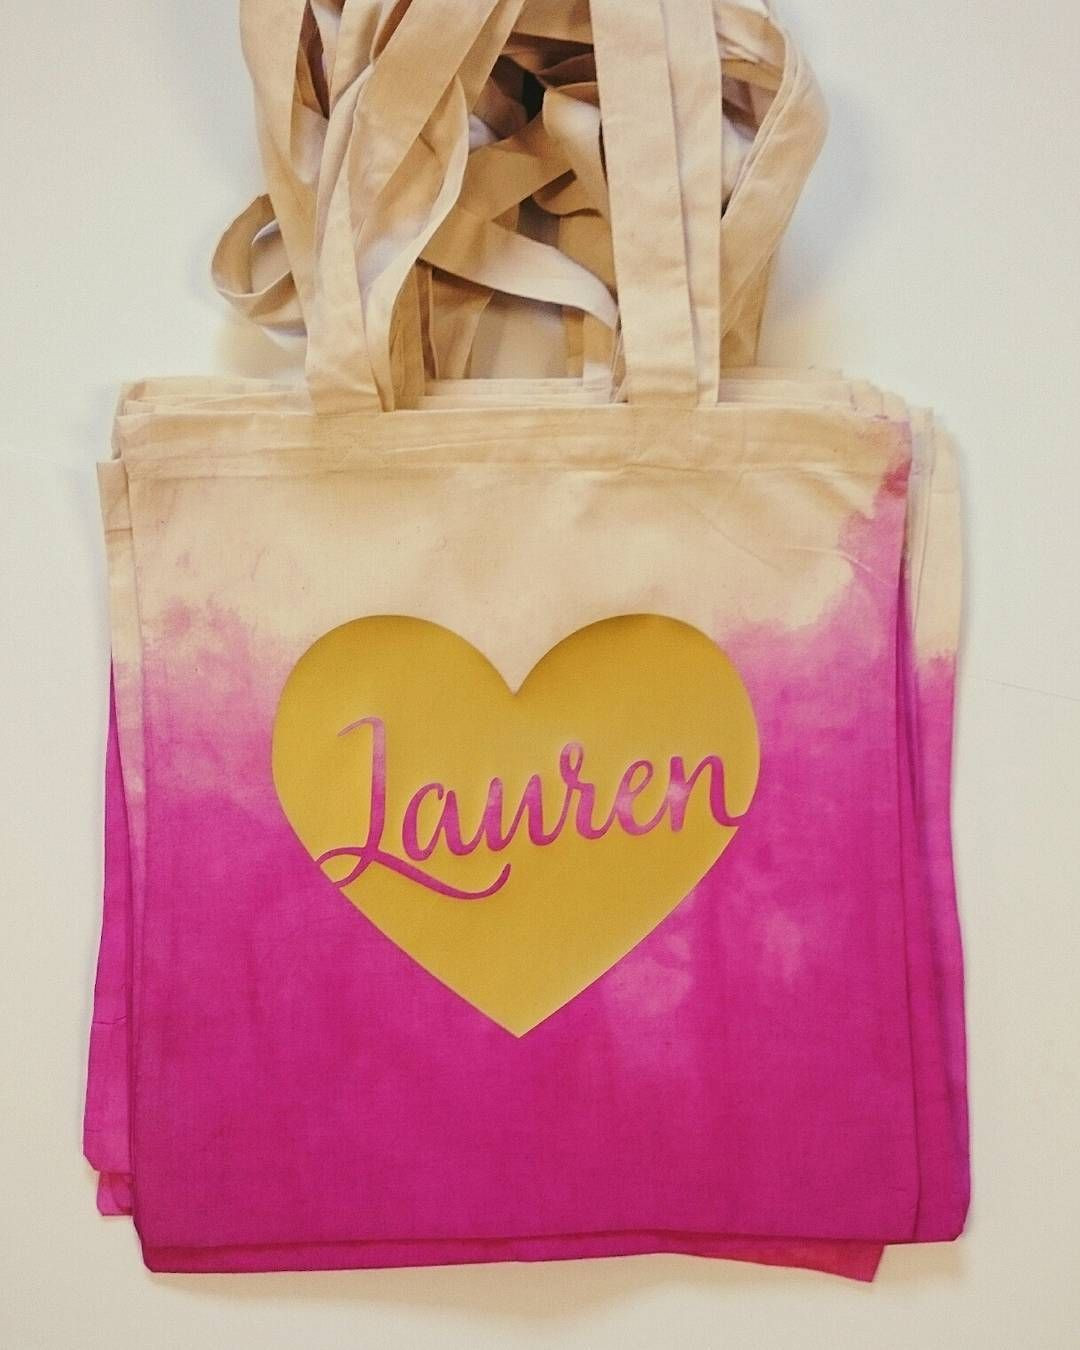 Rainy Day Bachelorette Party Ideas
 Wedding Bags on Instagram “LOVE how these dip dyed totes